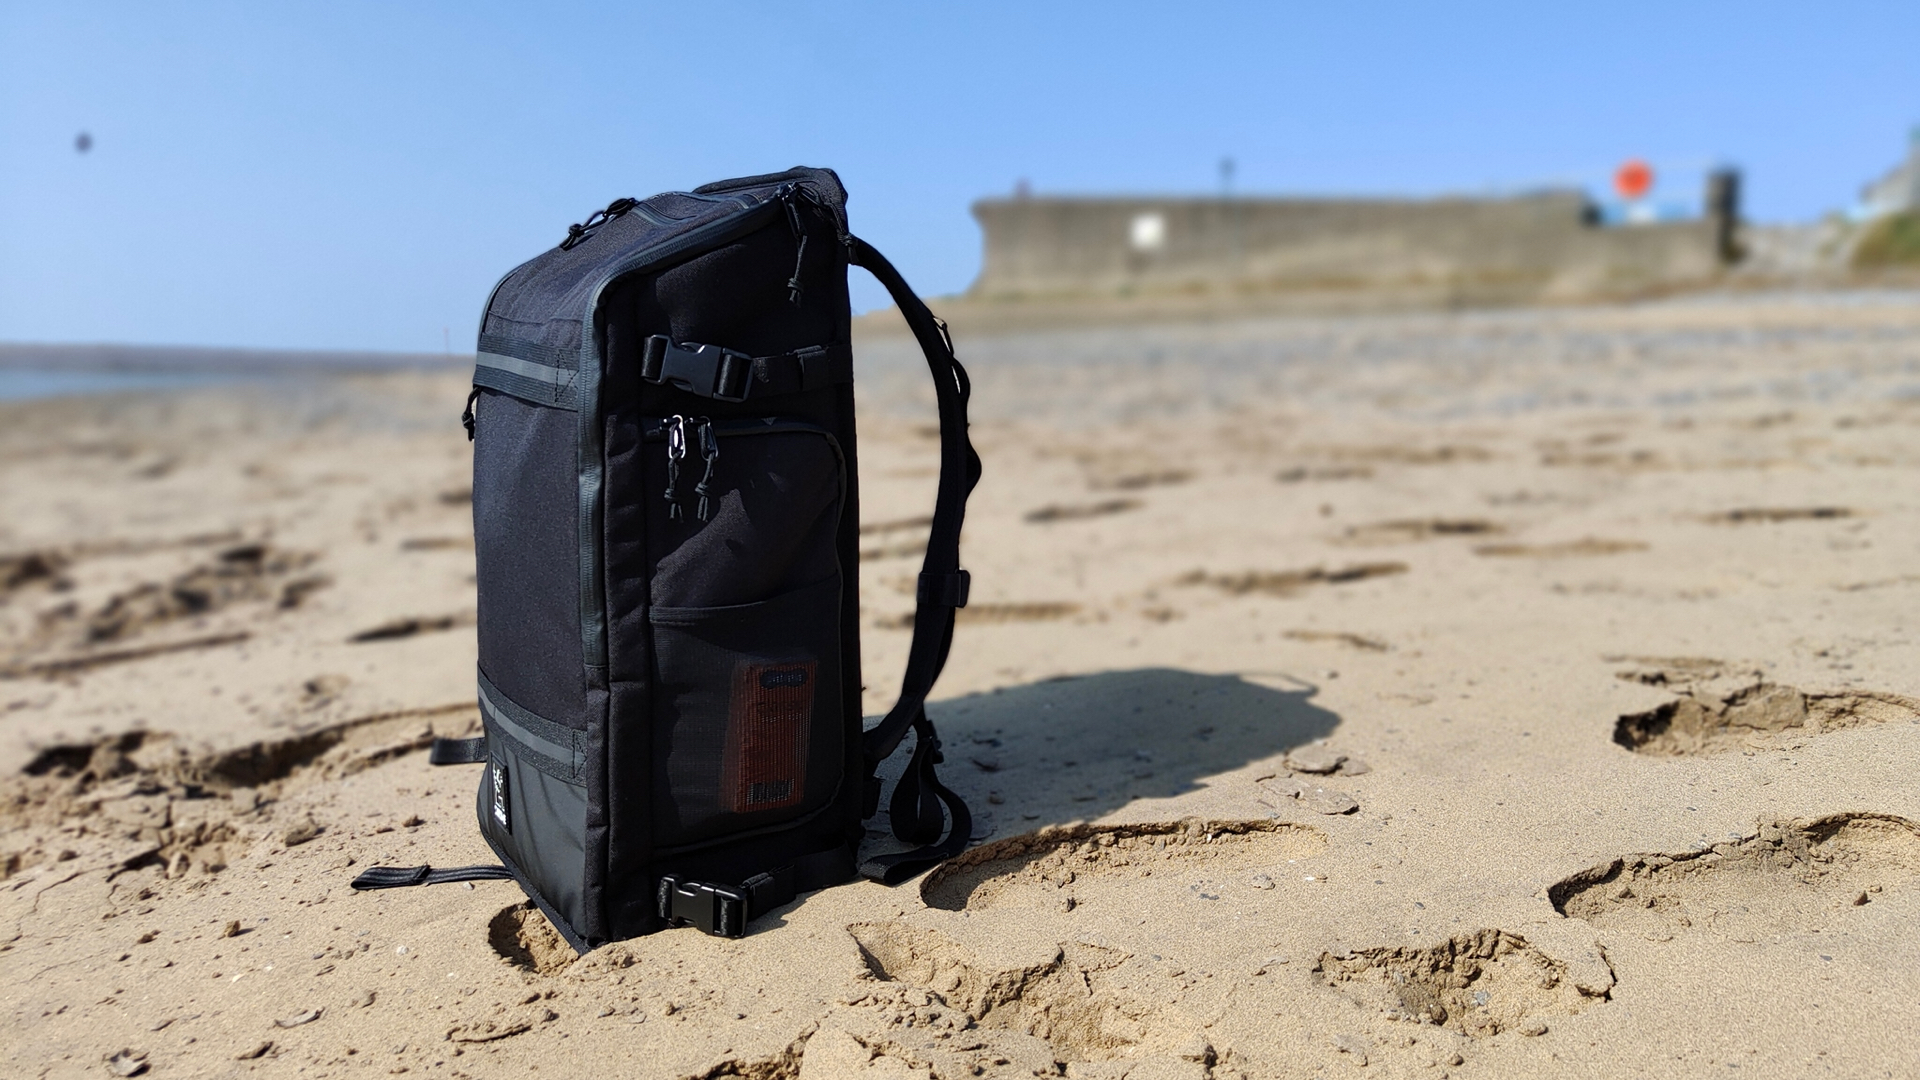 Chrome Industries Niko 3.0 Camera Backpack review: | T3